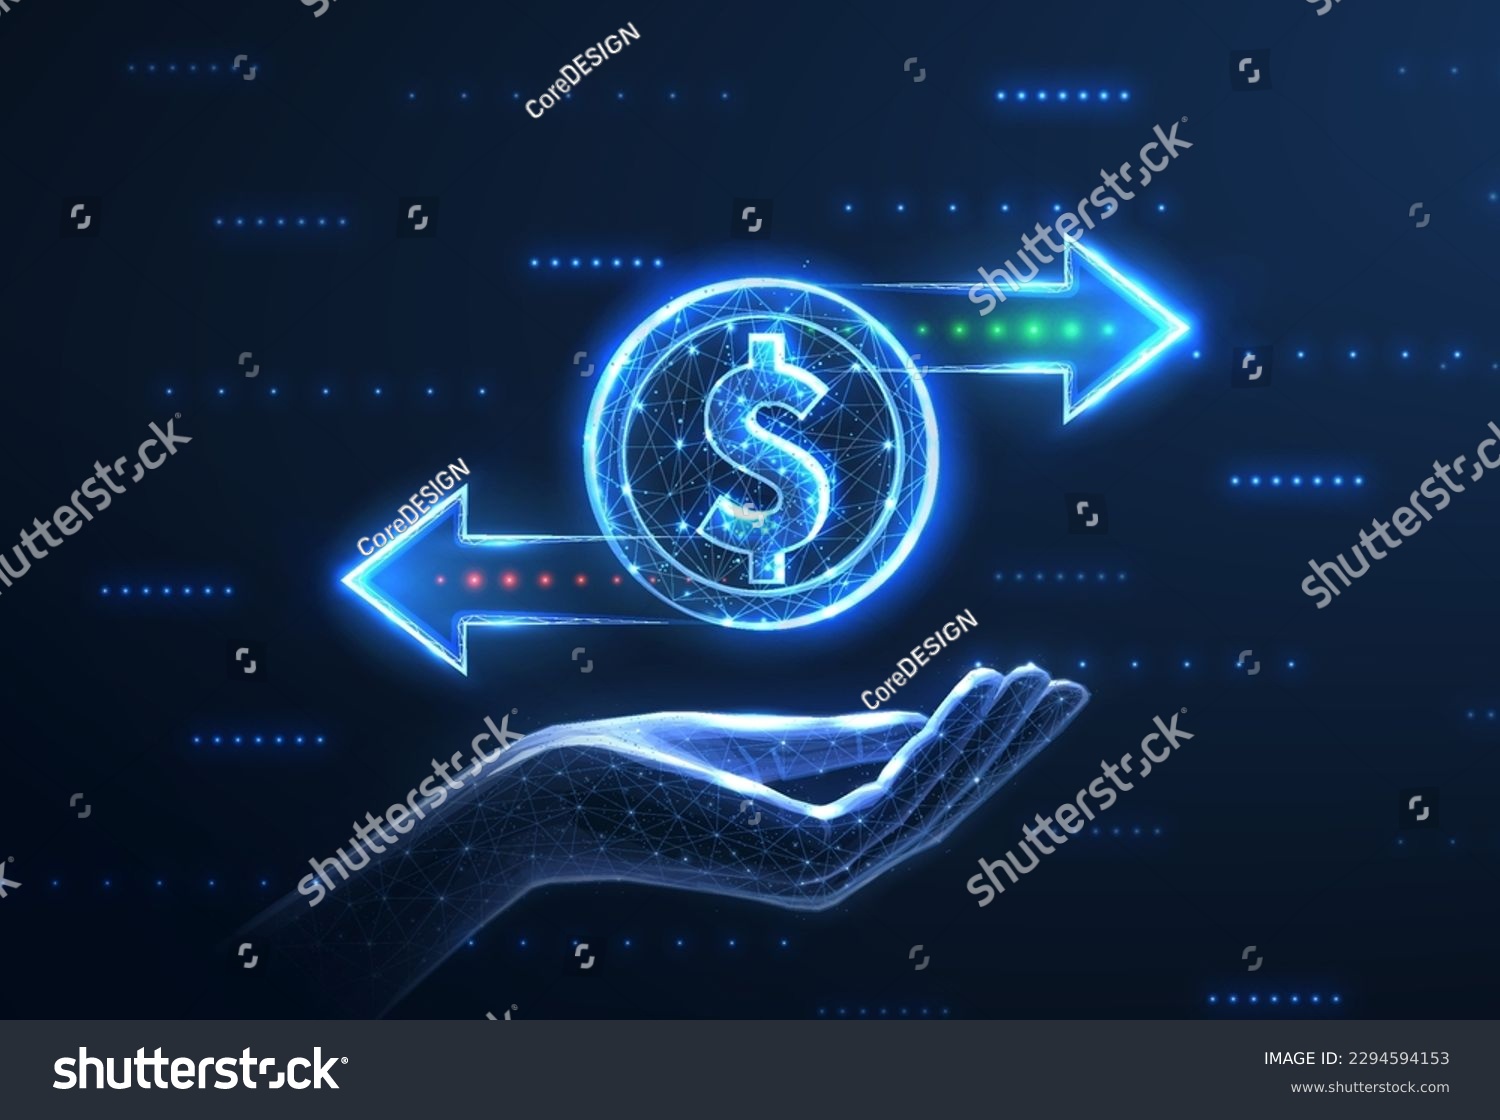 SVG of Coin and two right left arrows on hand. Financial service, Bank transfer, currency exchange, stock investment, cashback rewards, revenue generation, stock market, money transfer concept. svg